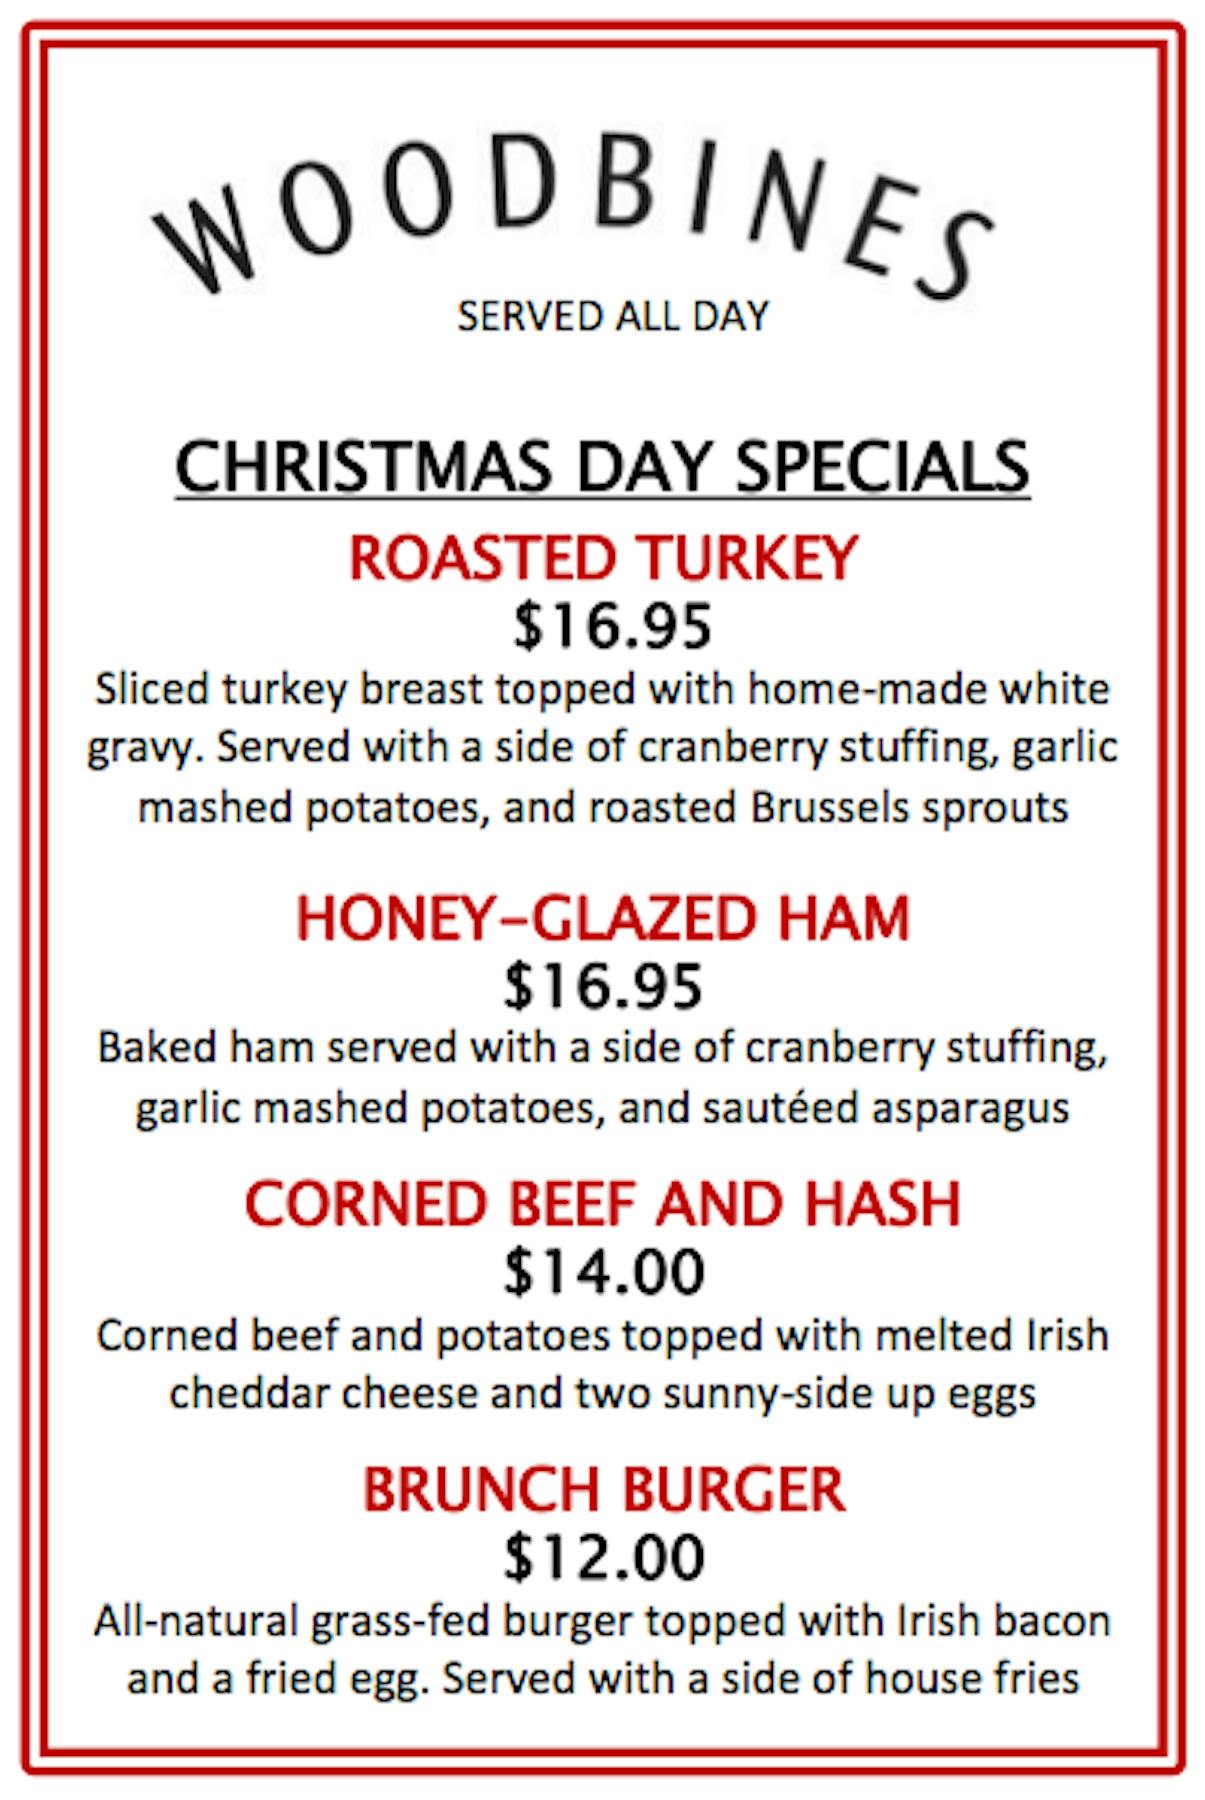 Woodbines_Christmas_2015_Specials.png